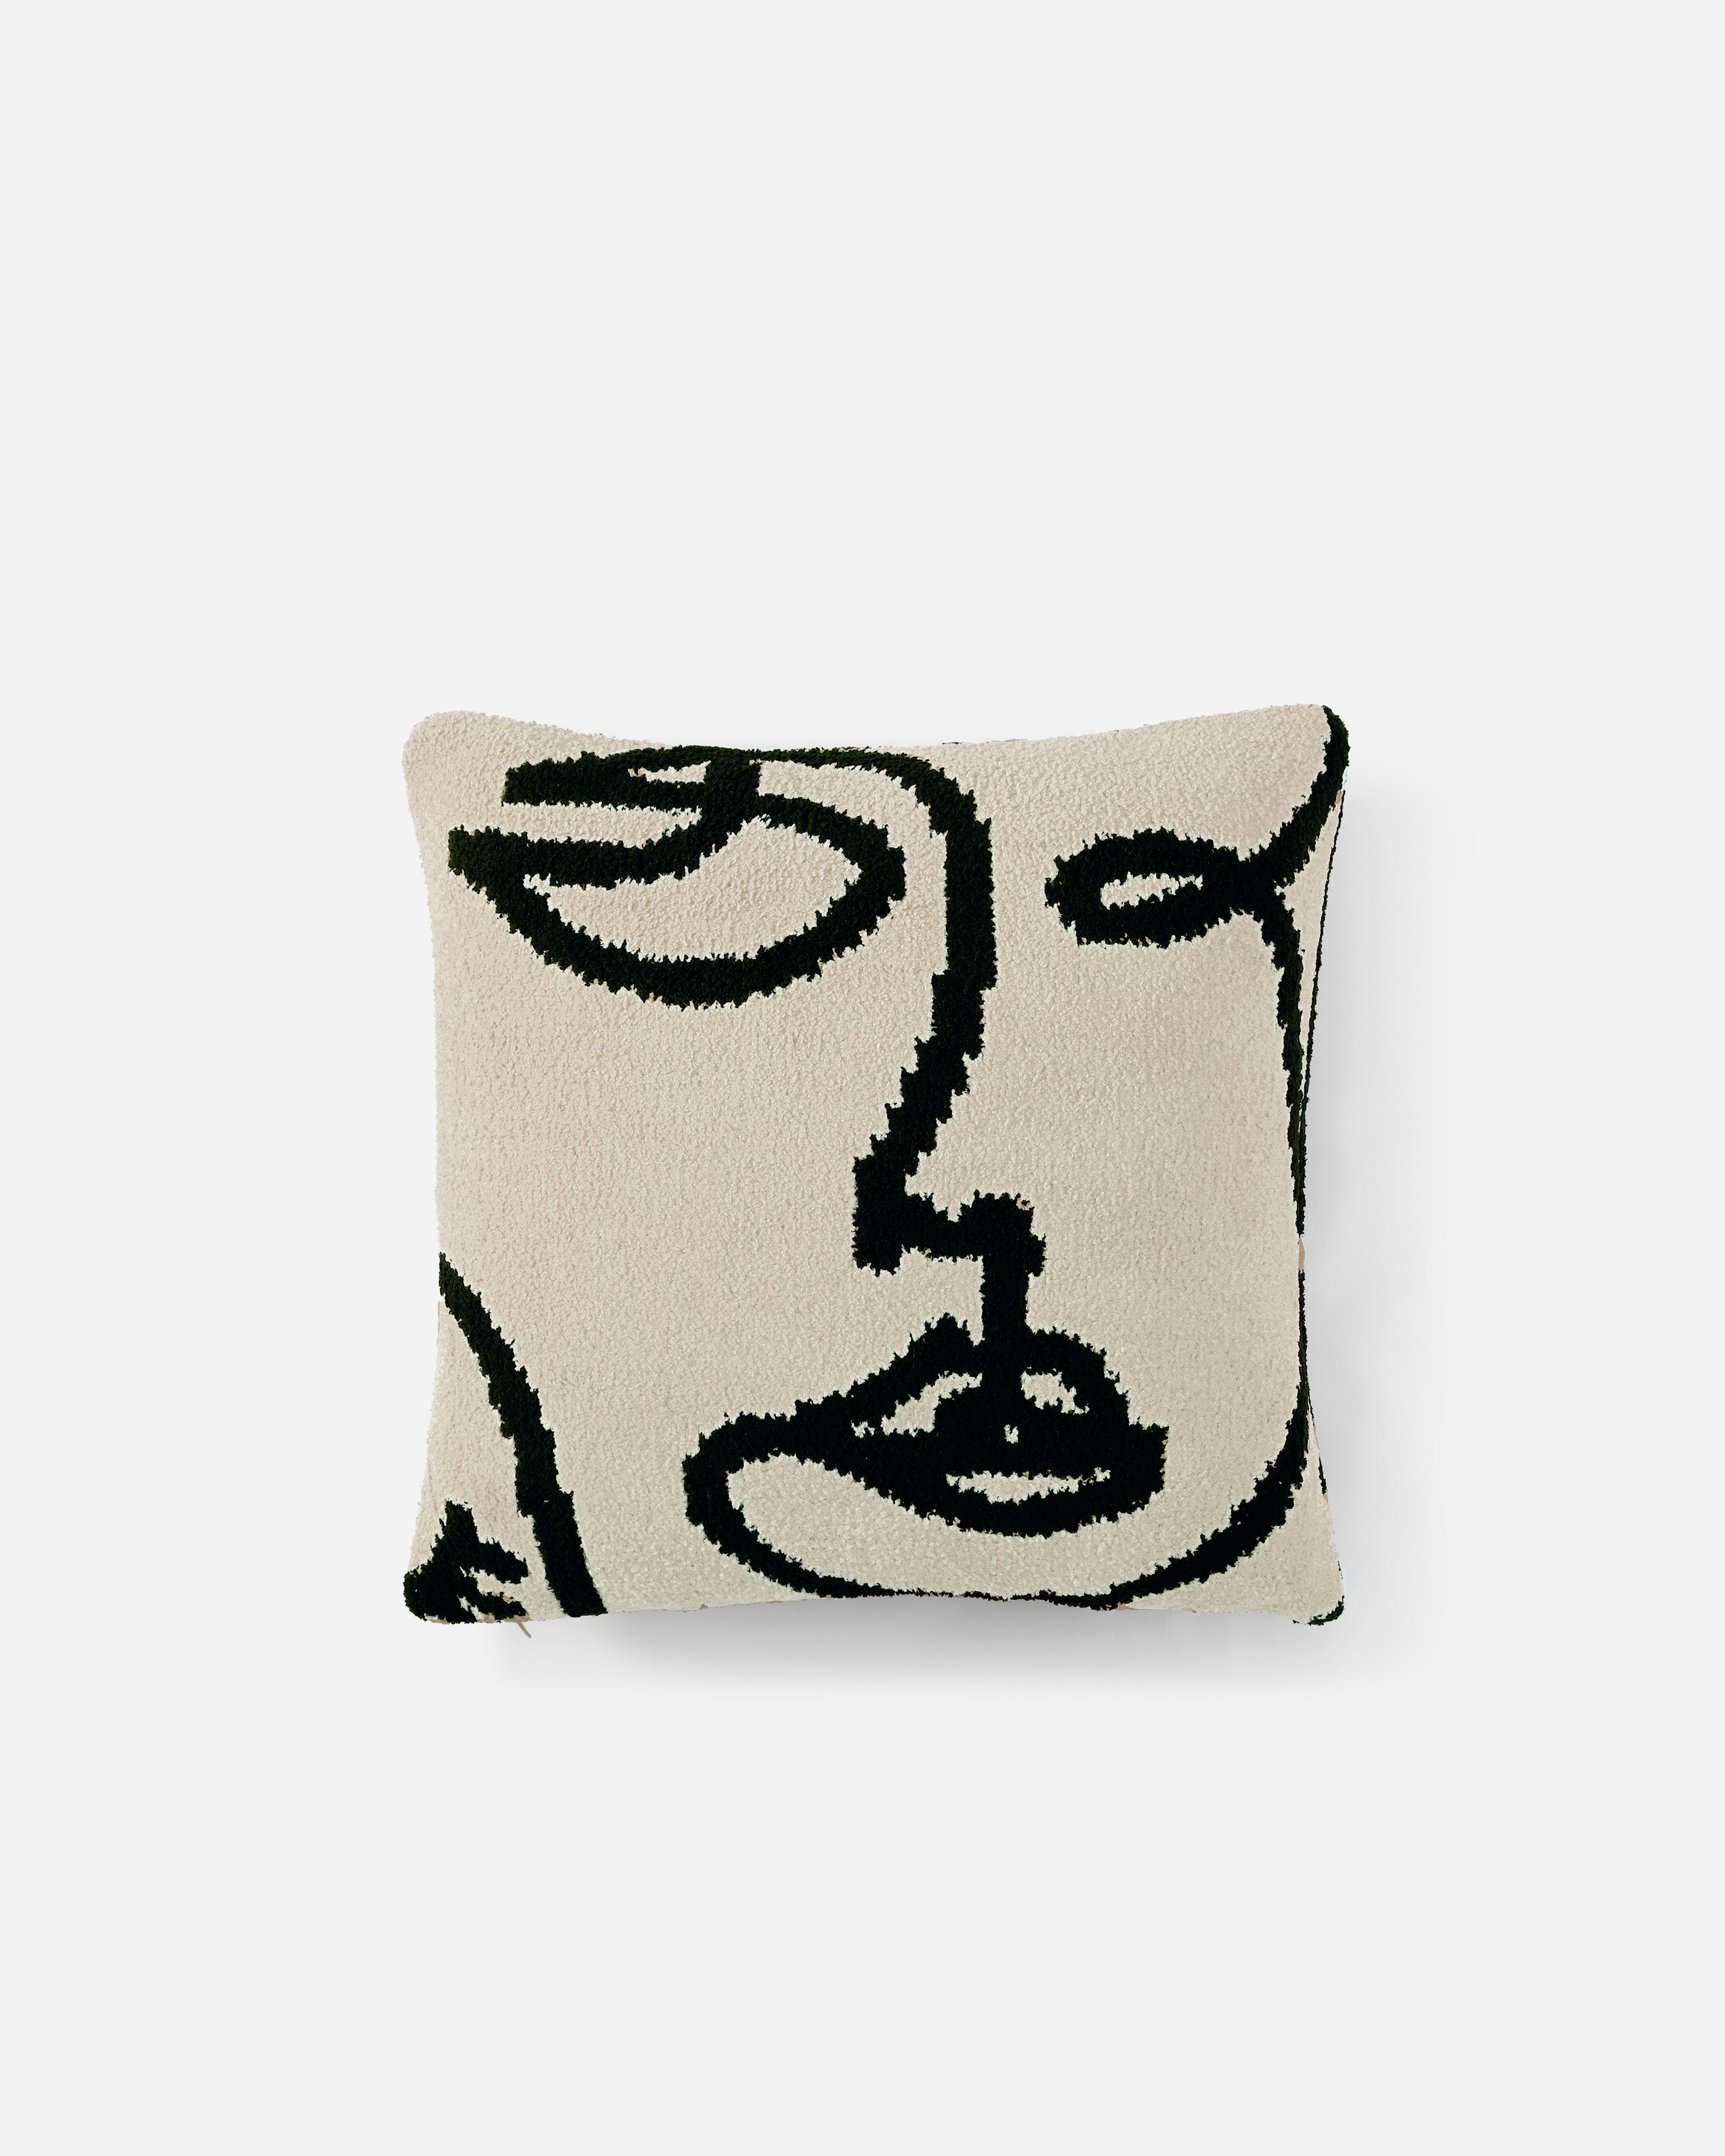 The Faces Throw Pillow by Sunday Citizen is a square cushion with a beige background that features an abstract black line drawing of a face. This memory foam design embodies a modern and minimalist aesthetic, with elements of the face, including the eyes, nose, and lips, depicted in a continuous, flowing style. Additionally, it is conveniently machine washable.